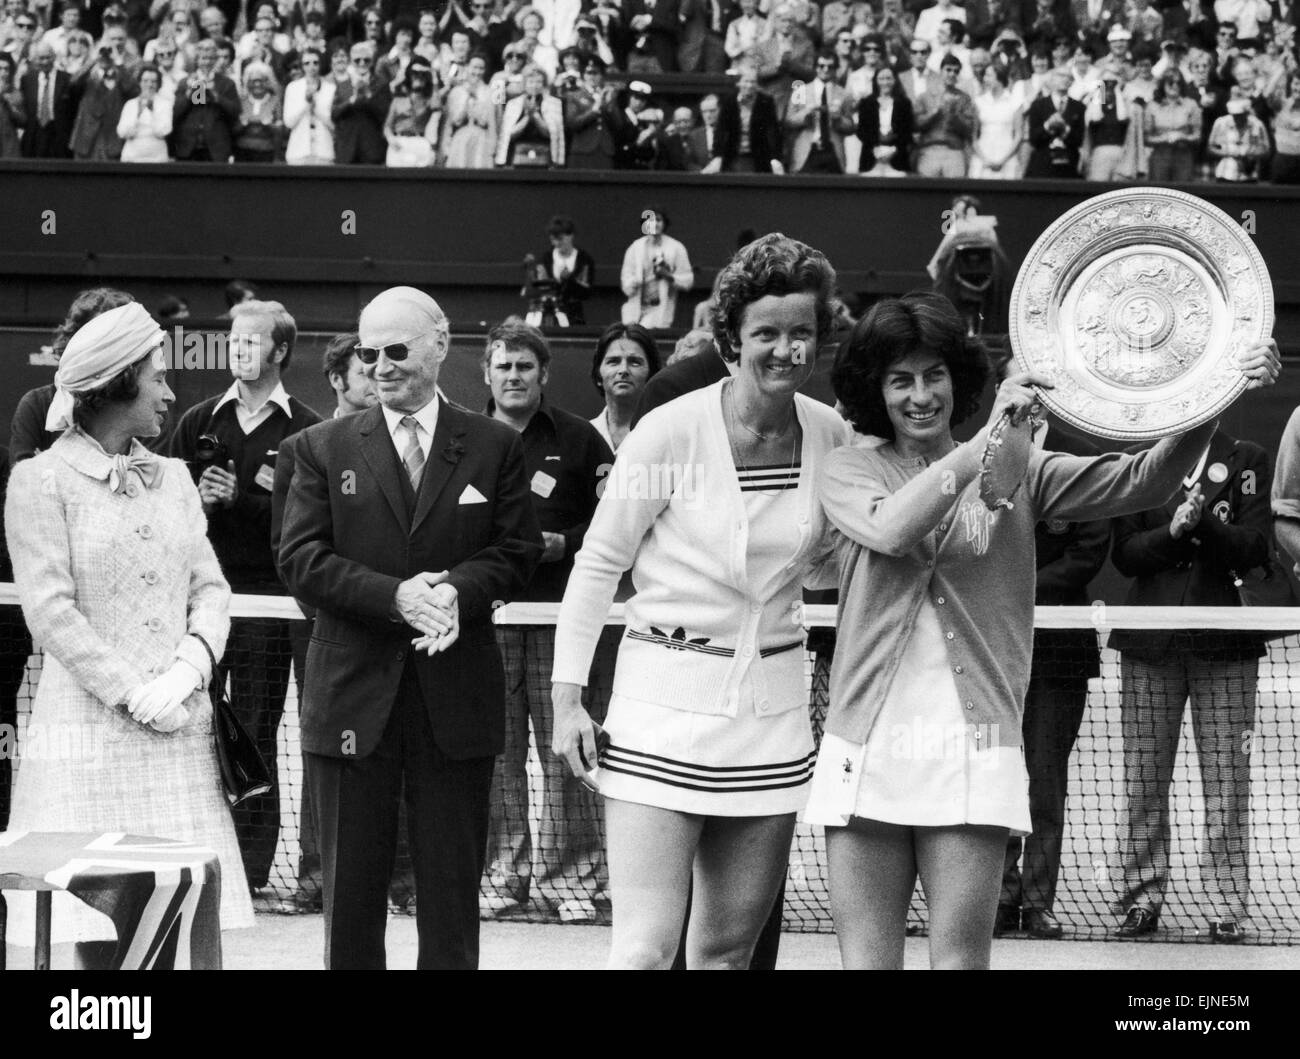 14,000 stamping fans cheered Virginia Wade to victory in her fight against Holland's Betty Stove. Ginny, convinced that she would win received a standing ovation. 'It was like a fairytale,' she said. There was so much noise I couldn't her wat the Queen said'. Our Picture Shows; Virginia Wade with the trophy posing with Betty Stove whilst the Queen chats with a Wimbledon official in the background. 4th July 1977 Stock Photo